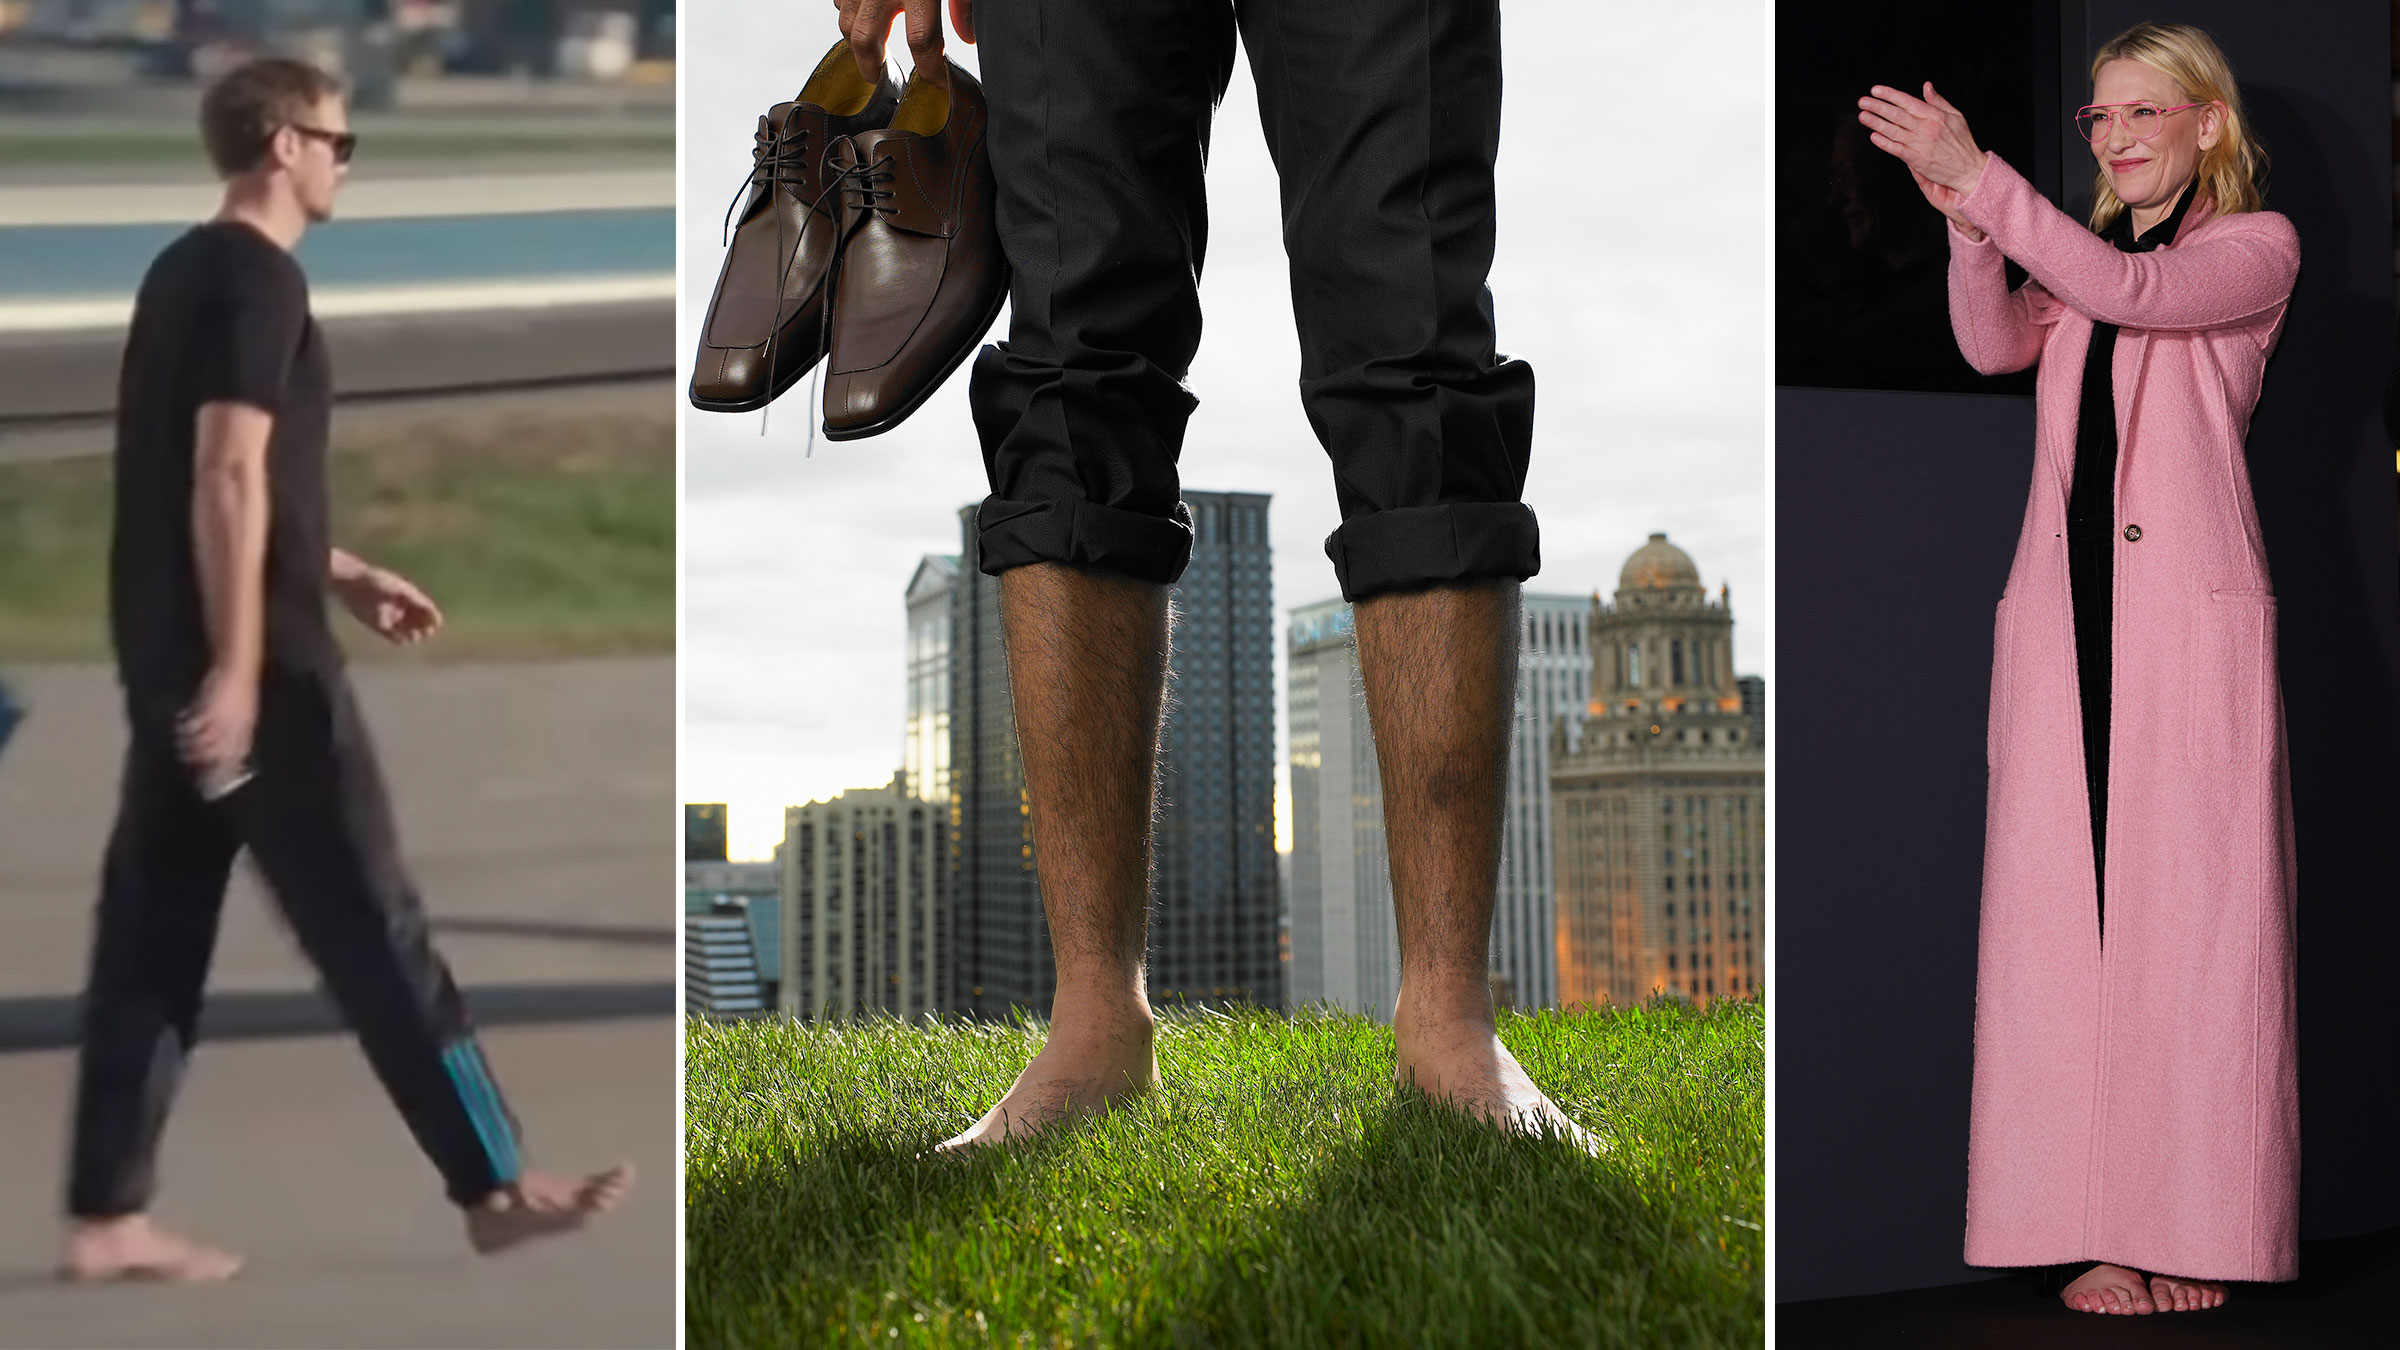 Is Walking Barefoot Bad For You? – My FootDr